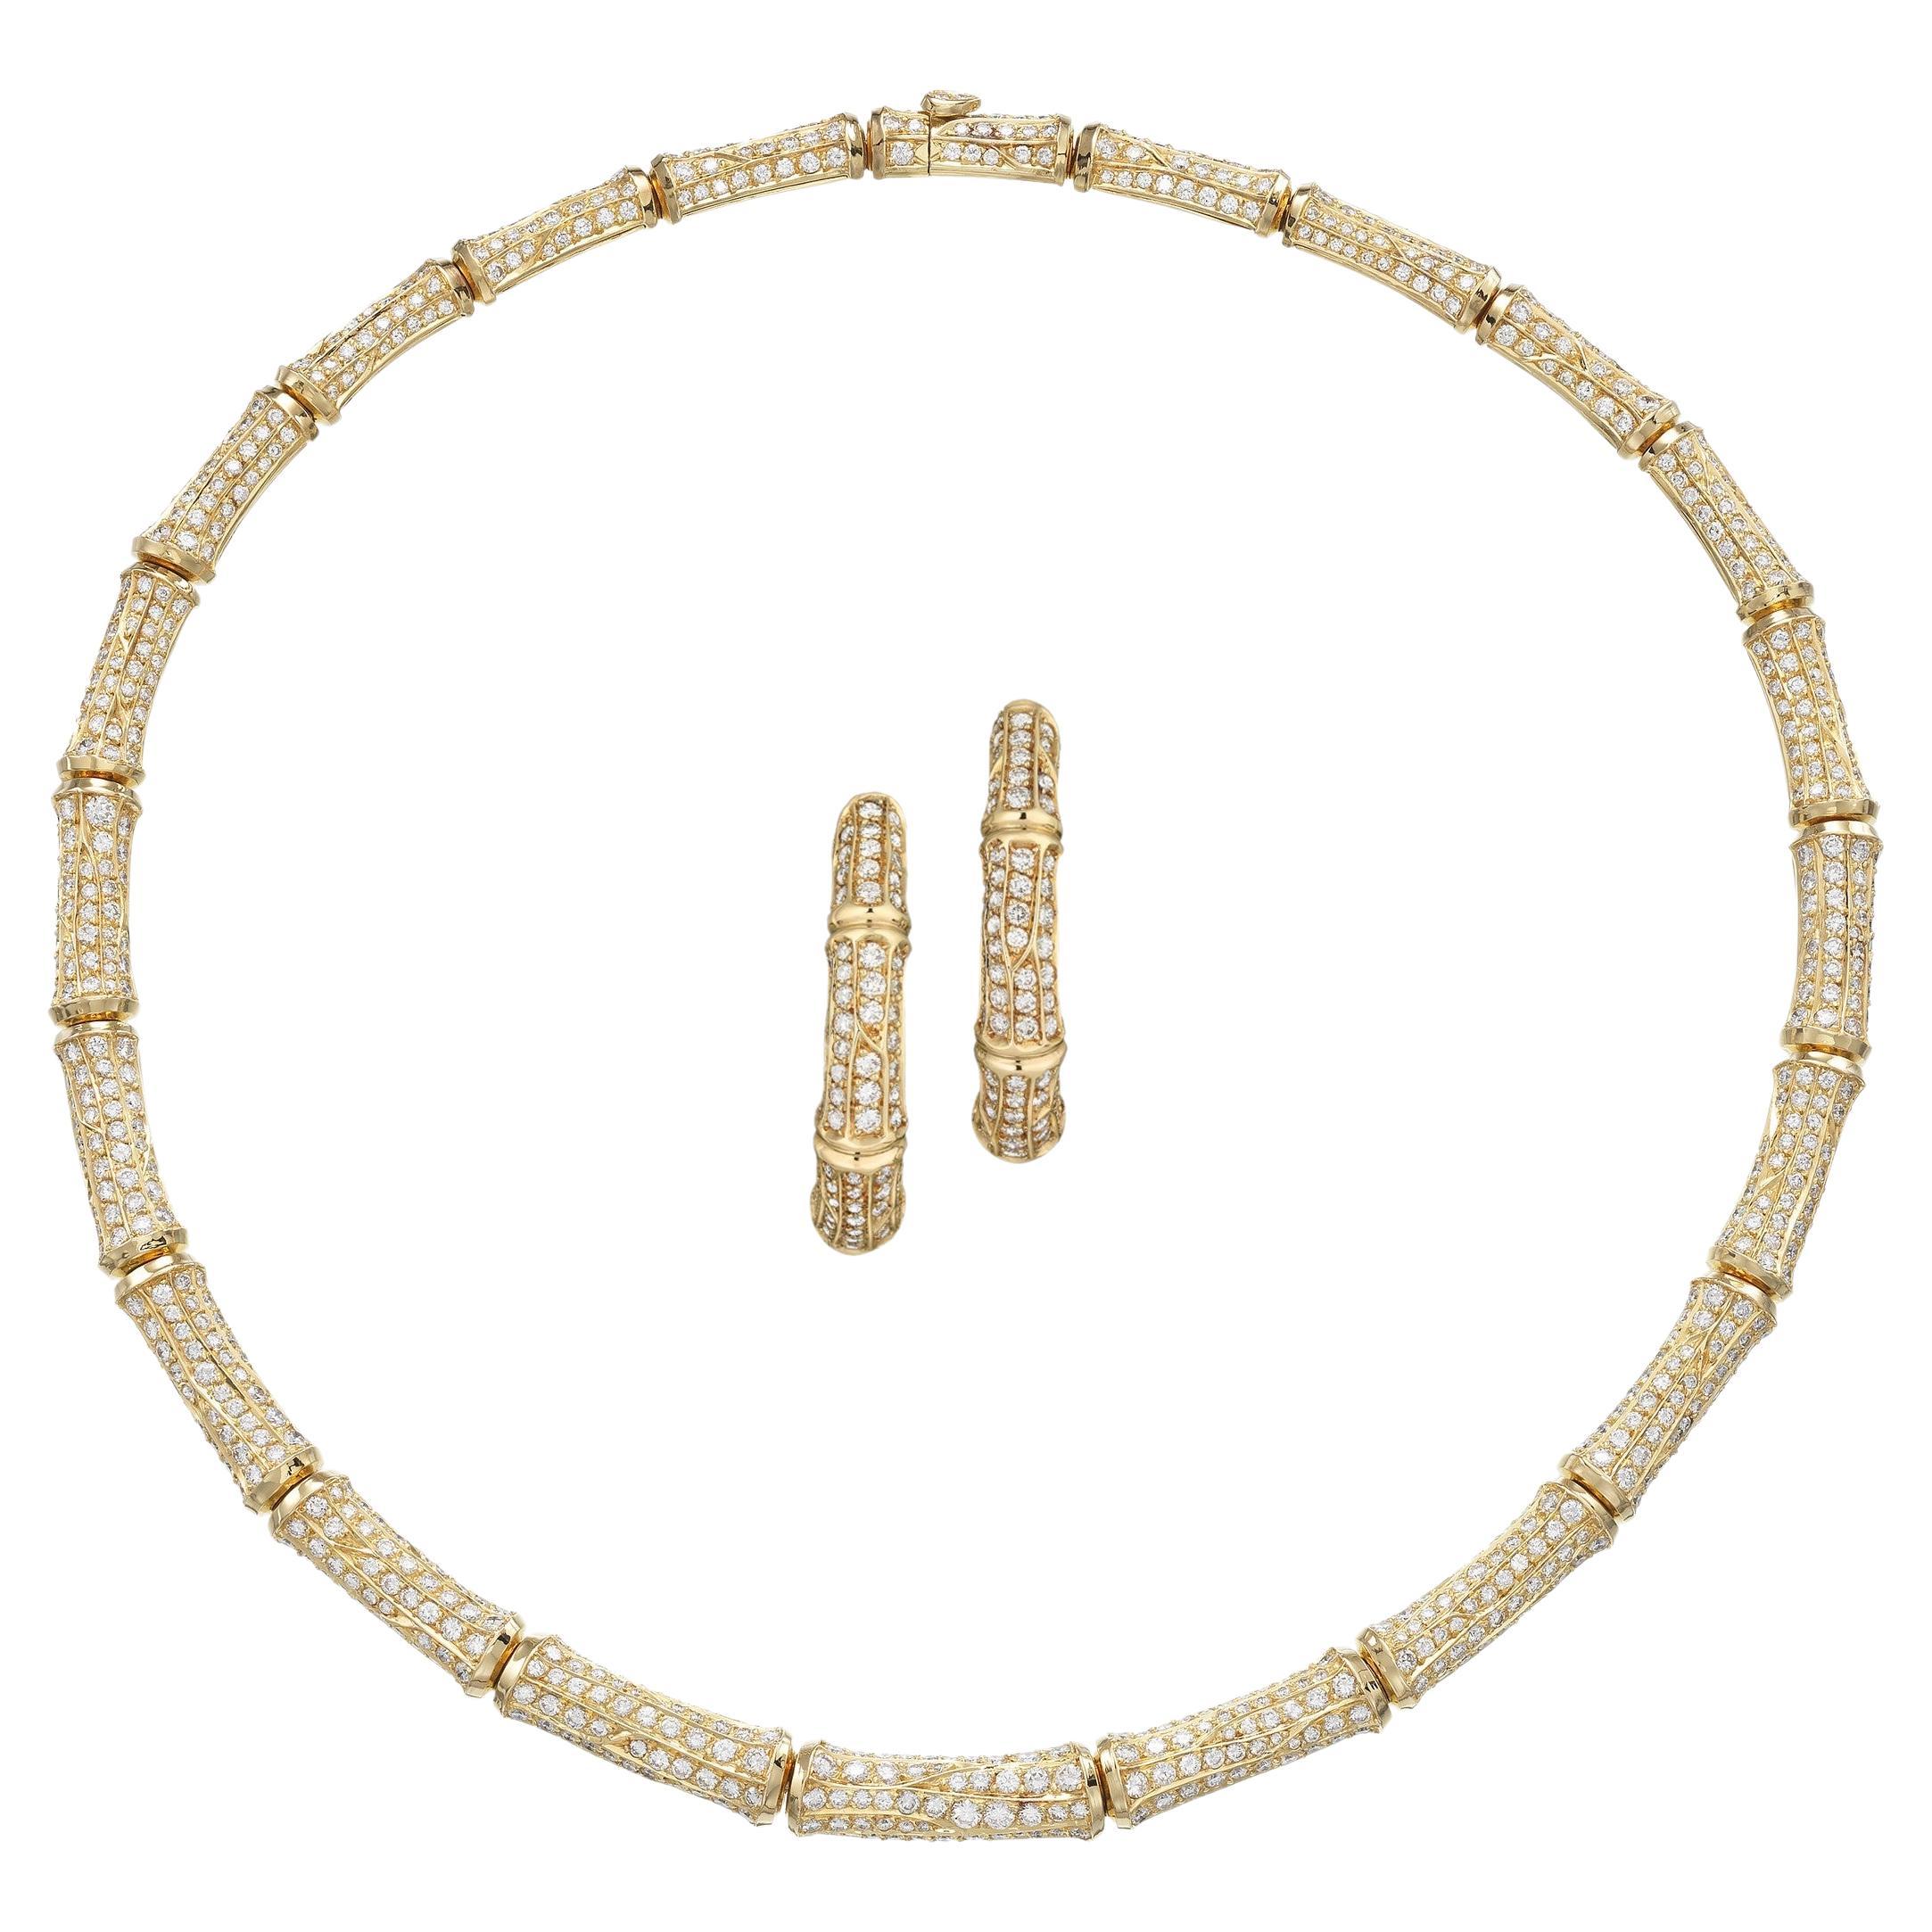 Cartier Bamboo 26cts Diamond Suite in 18K Gold Necklace and Earrings